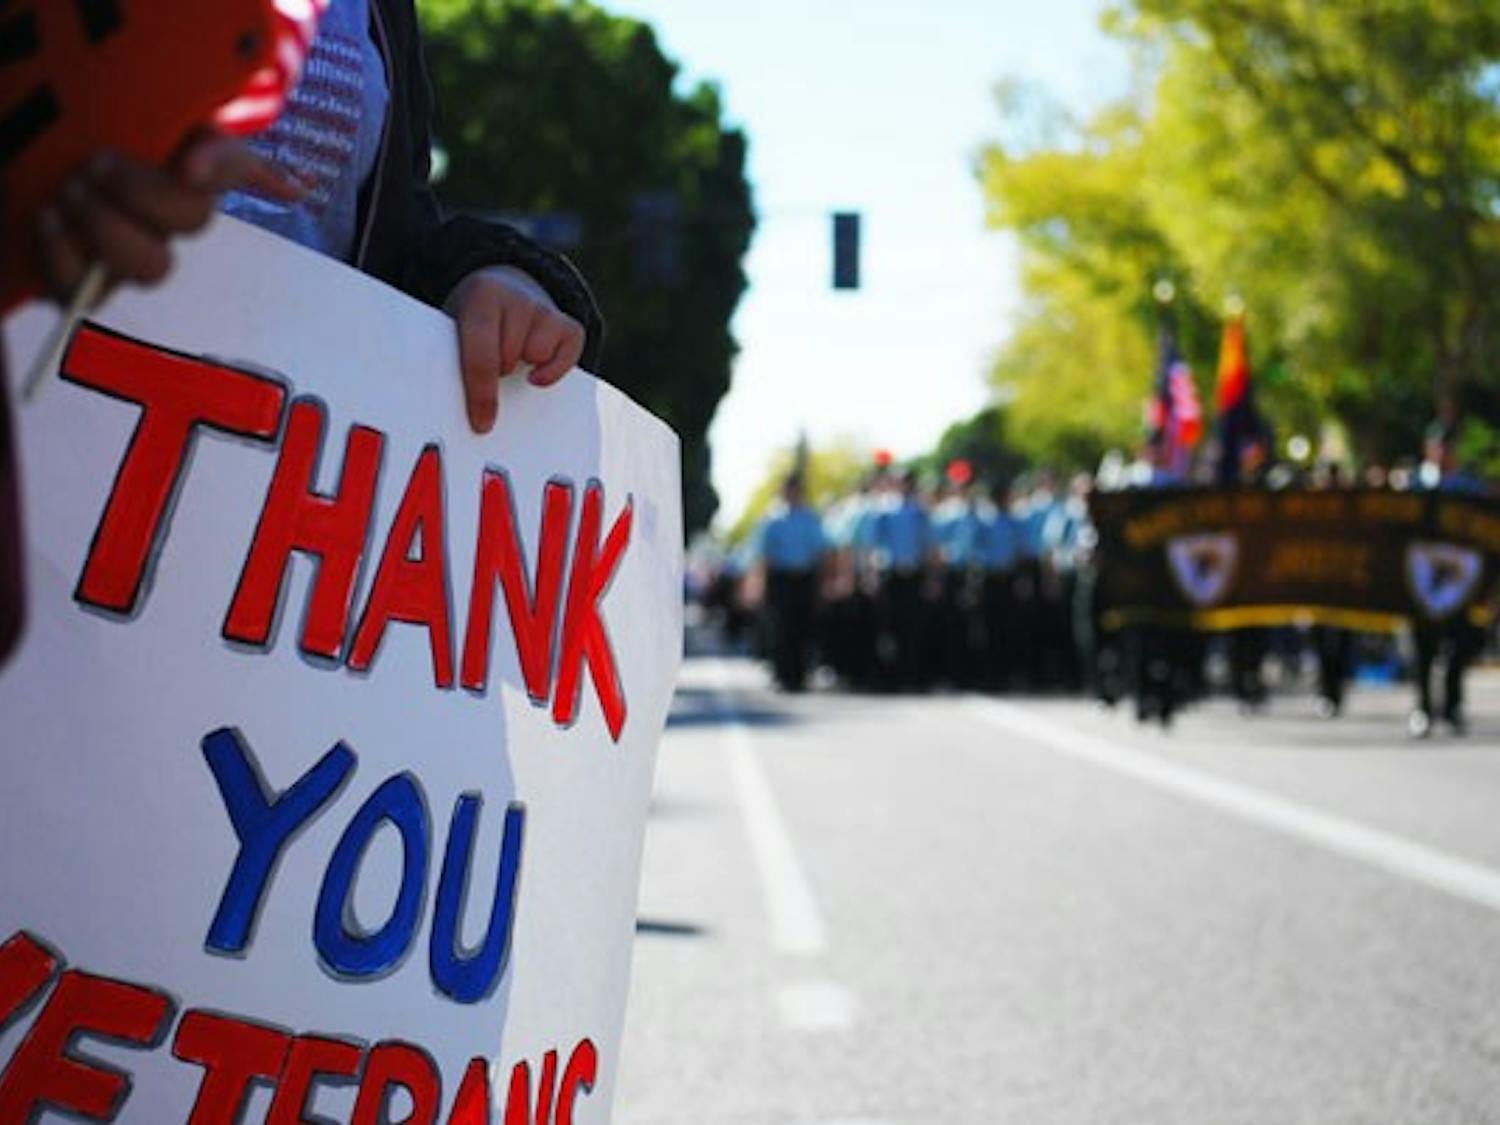 A spectator holds a "Thank you Veterans" sign as the junior RTC of Marcos De Niza High School marches down Mill Avenue during the Tempe Veterans Day parade, Monday morning. (Photo by Murphy Bannerman)